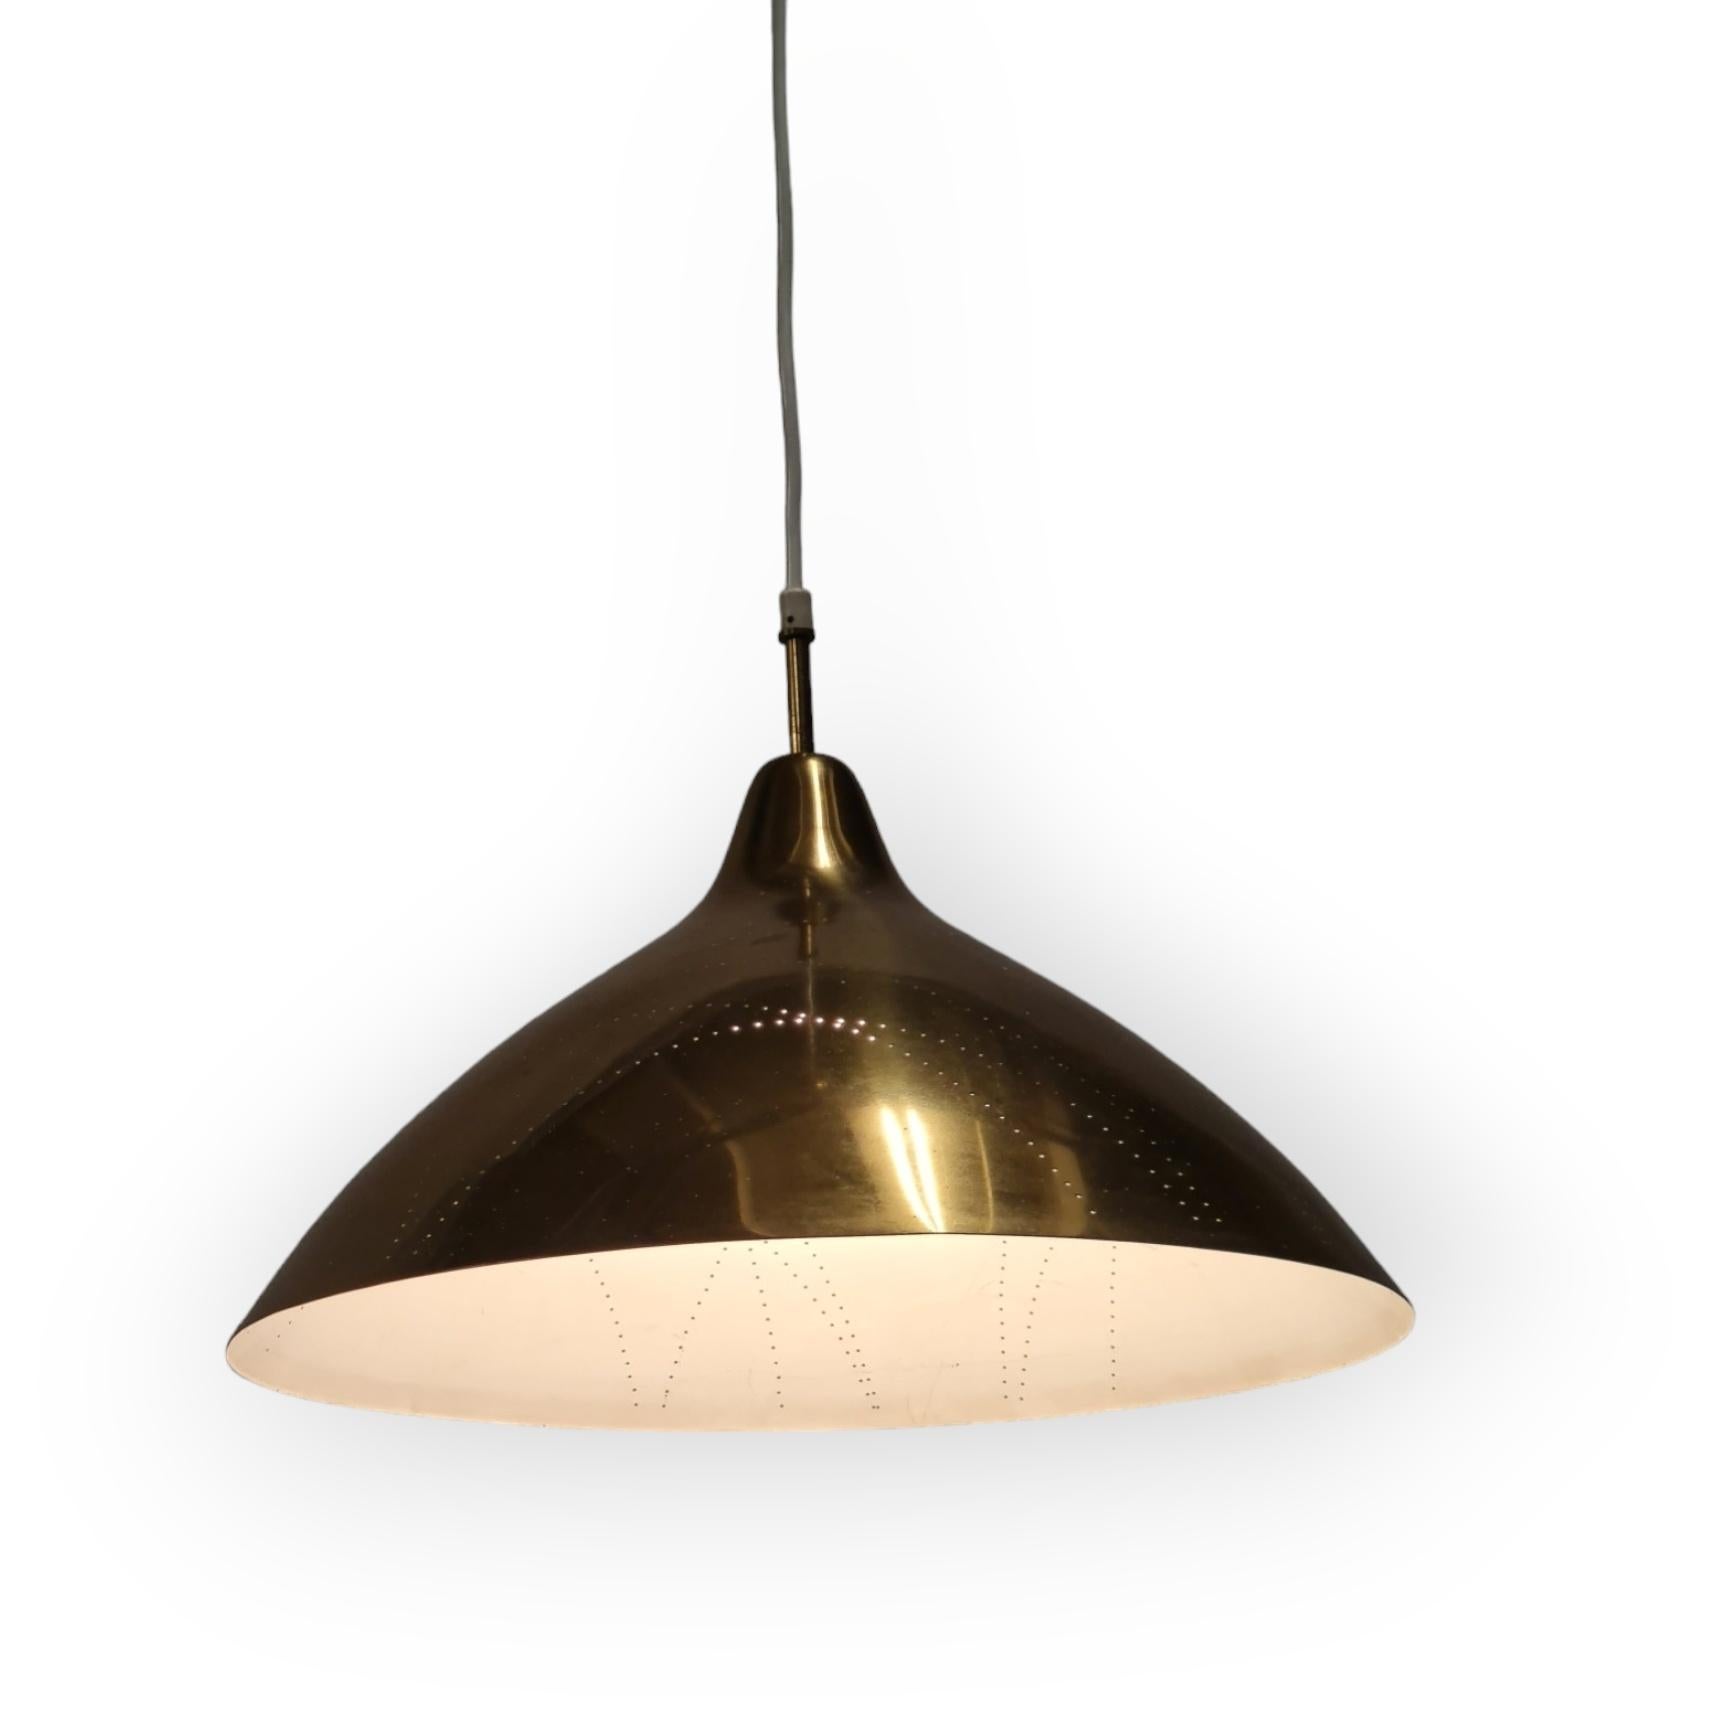 Mid-20th Century Lisa Johansson-Papé Brass Ceiling Pendant with Line Perforation, Orno 1950s For Sale